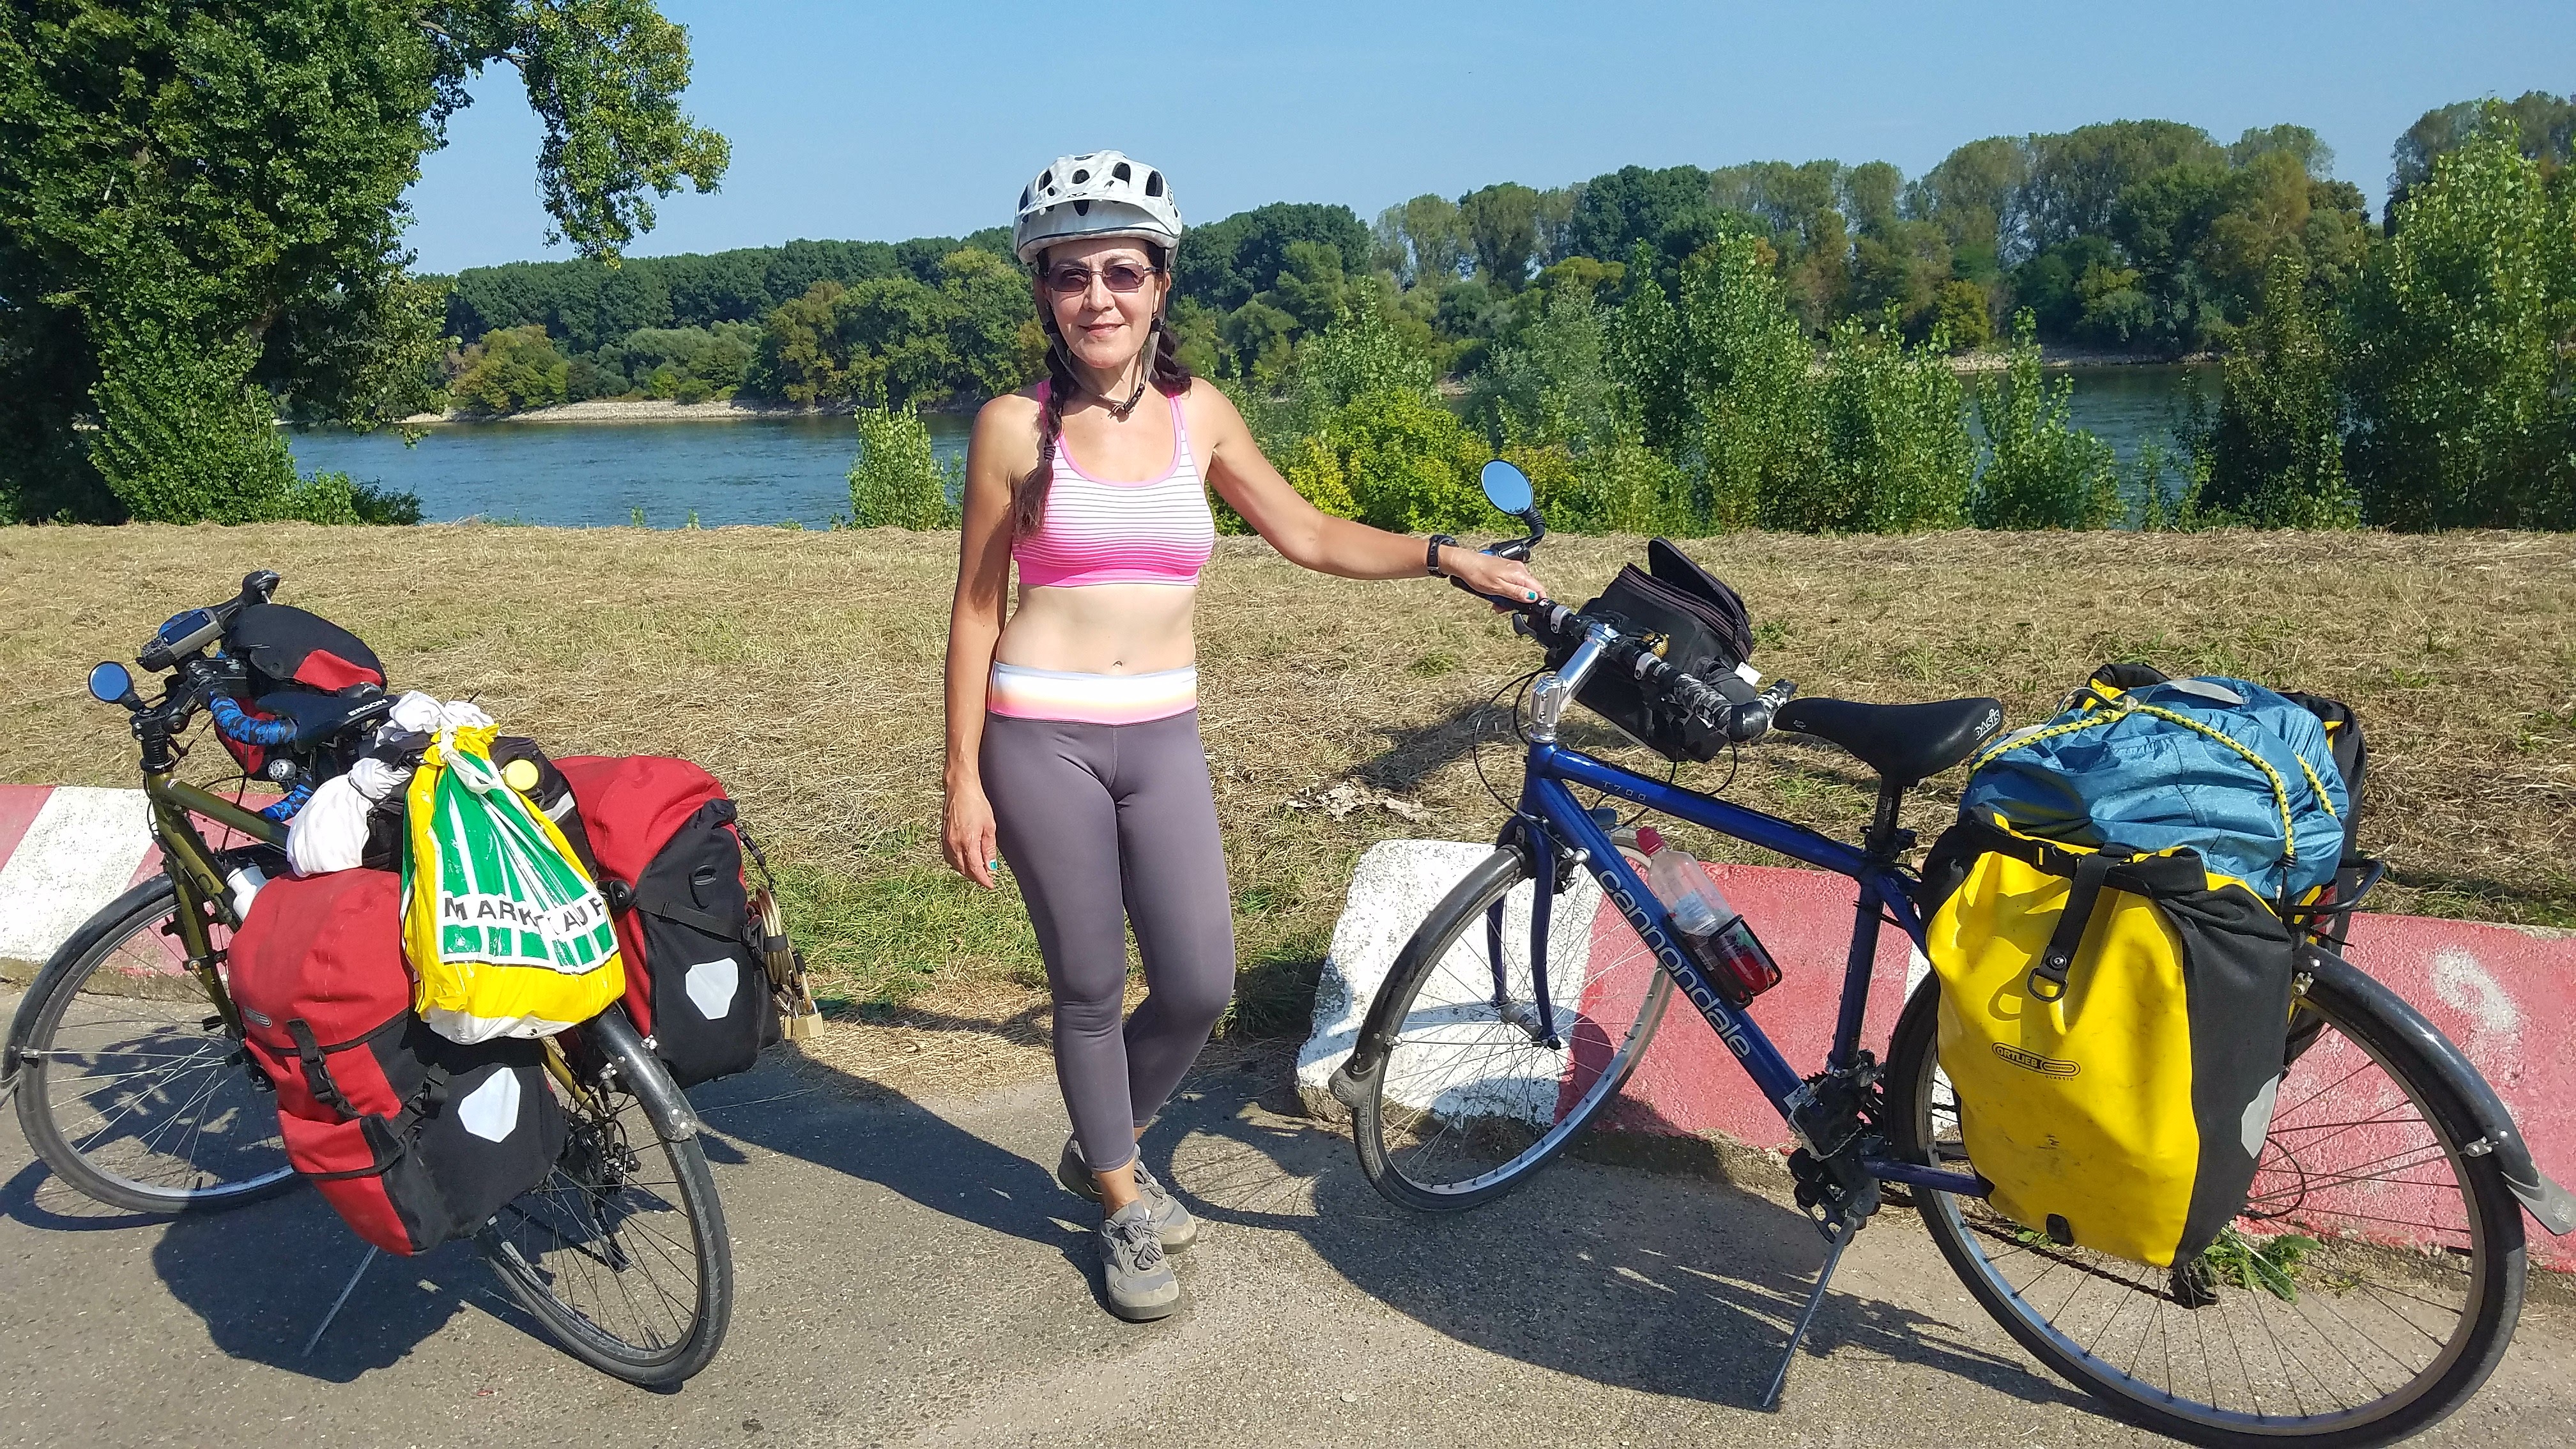 Bicycling the length of the Rhine River.